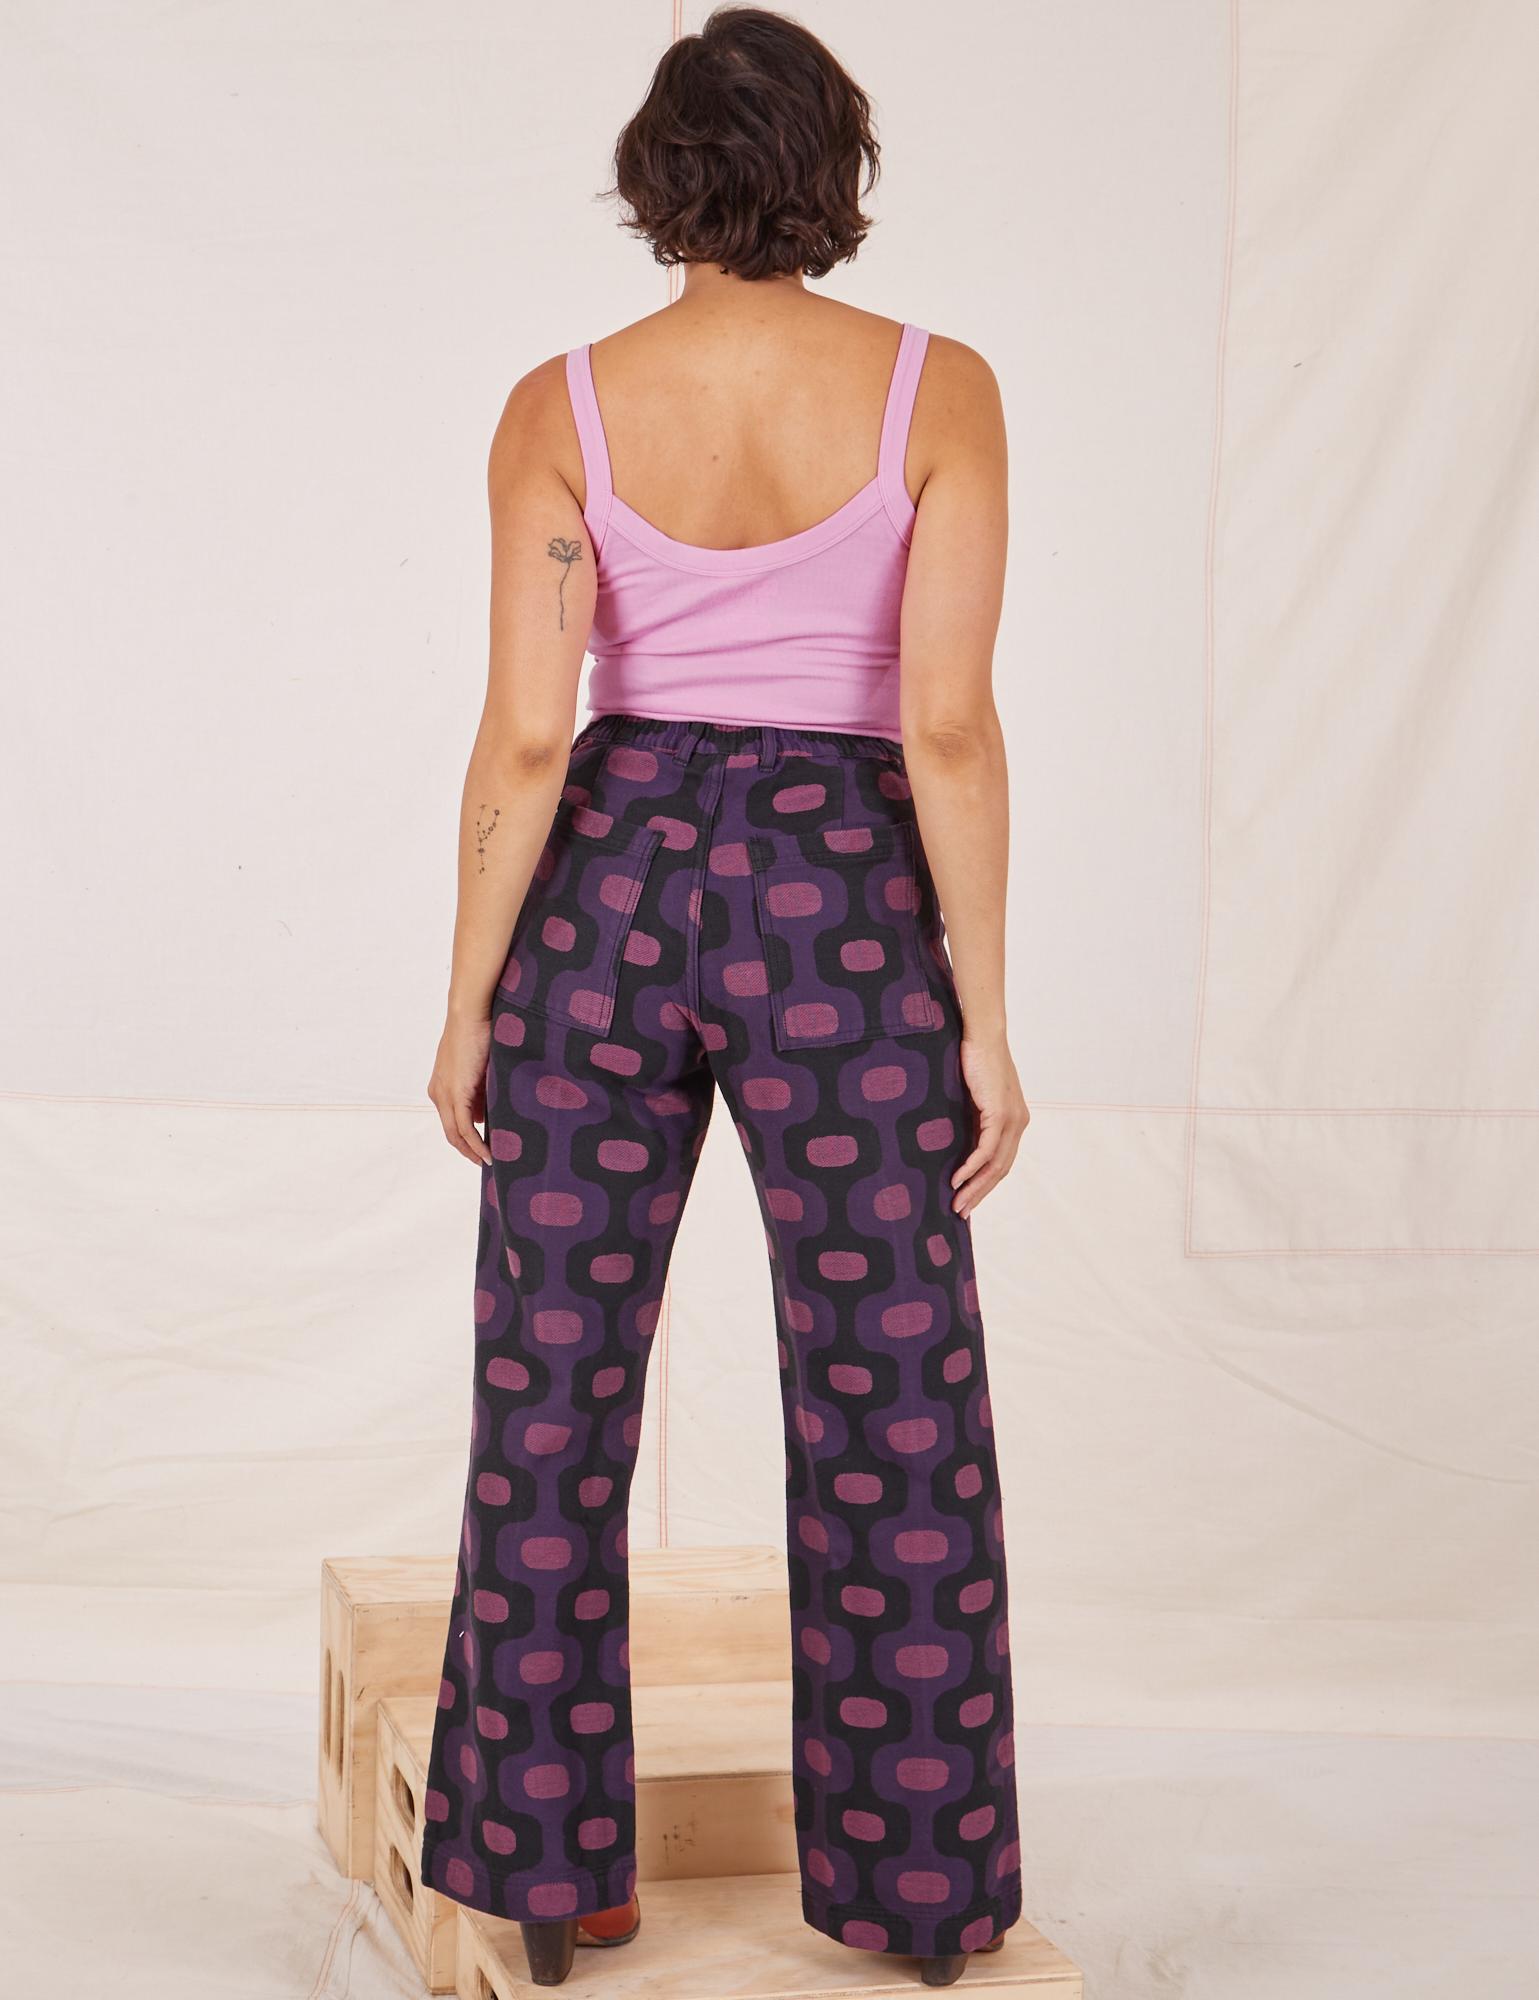 Back view of Western Pants in Purple Tile Jacquard and bubblegum Cami on Tiara